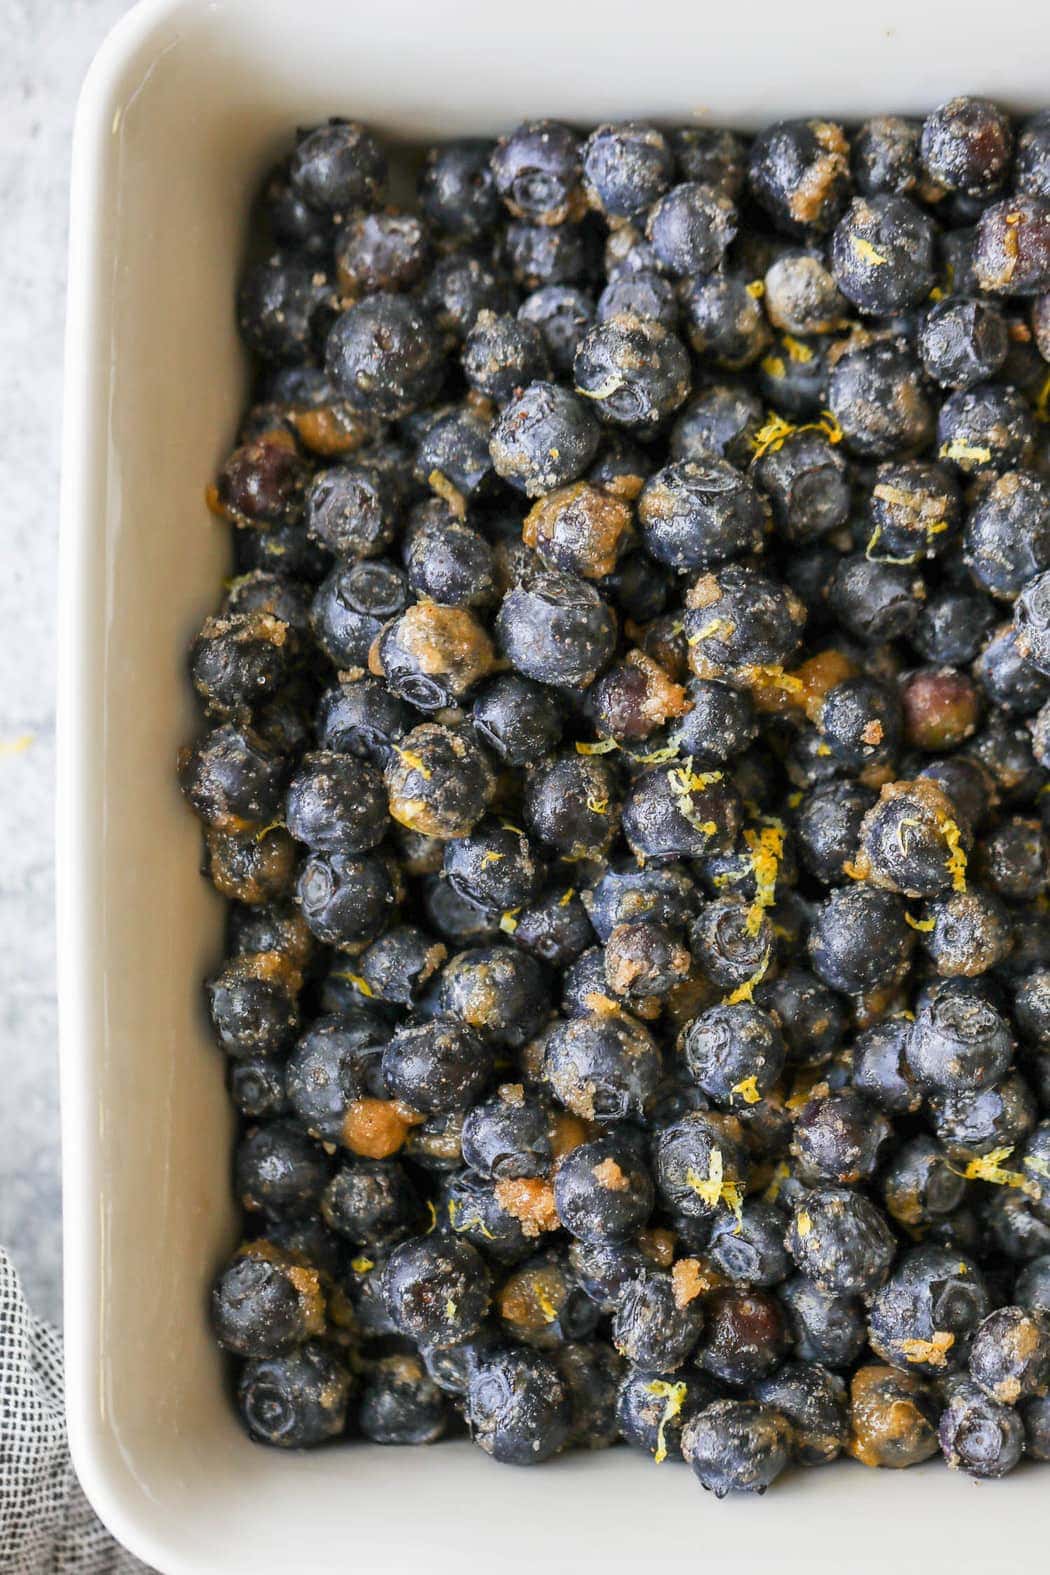 Fresh blueberries tossed in brown sugar, cinnamon, and lemon zest spread evenly in a white baking dish